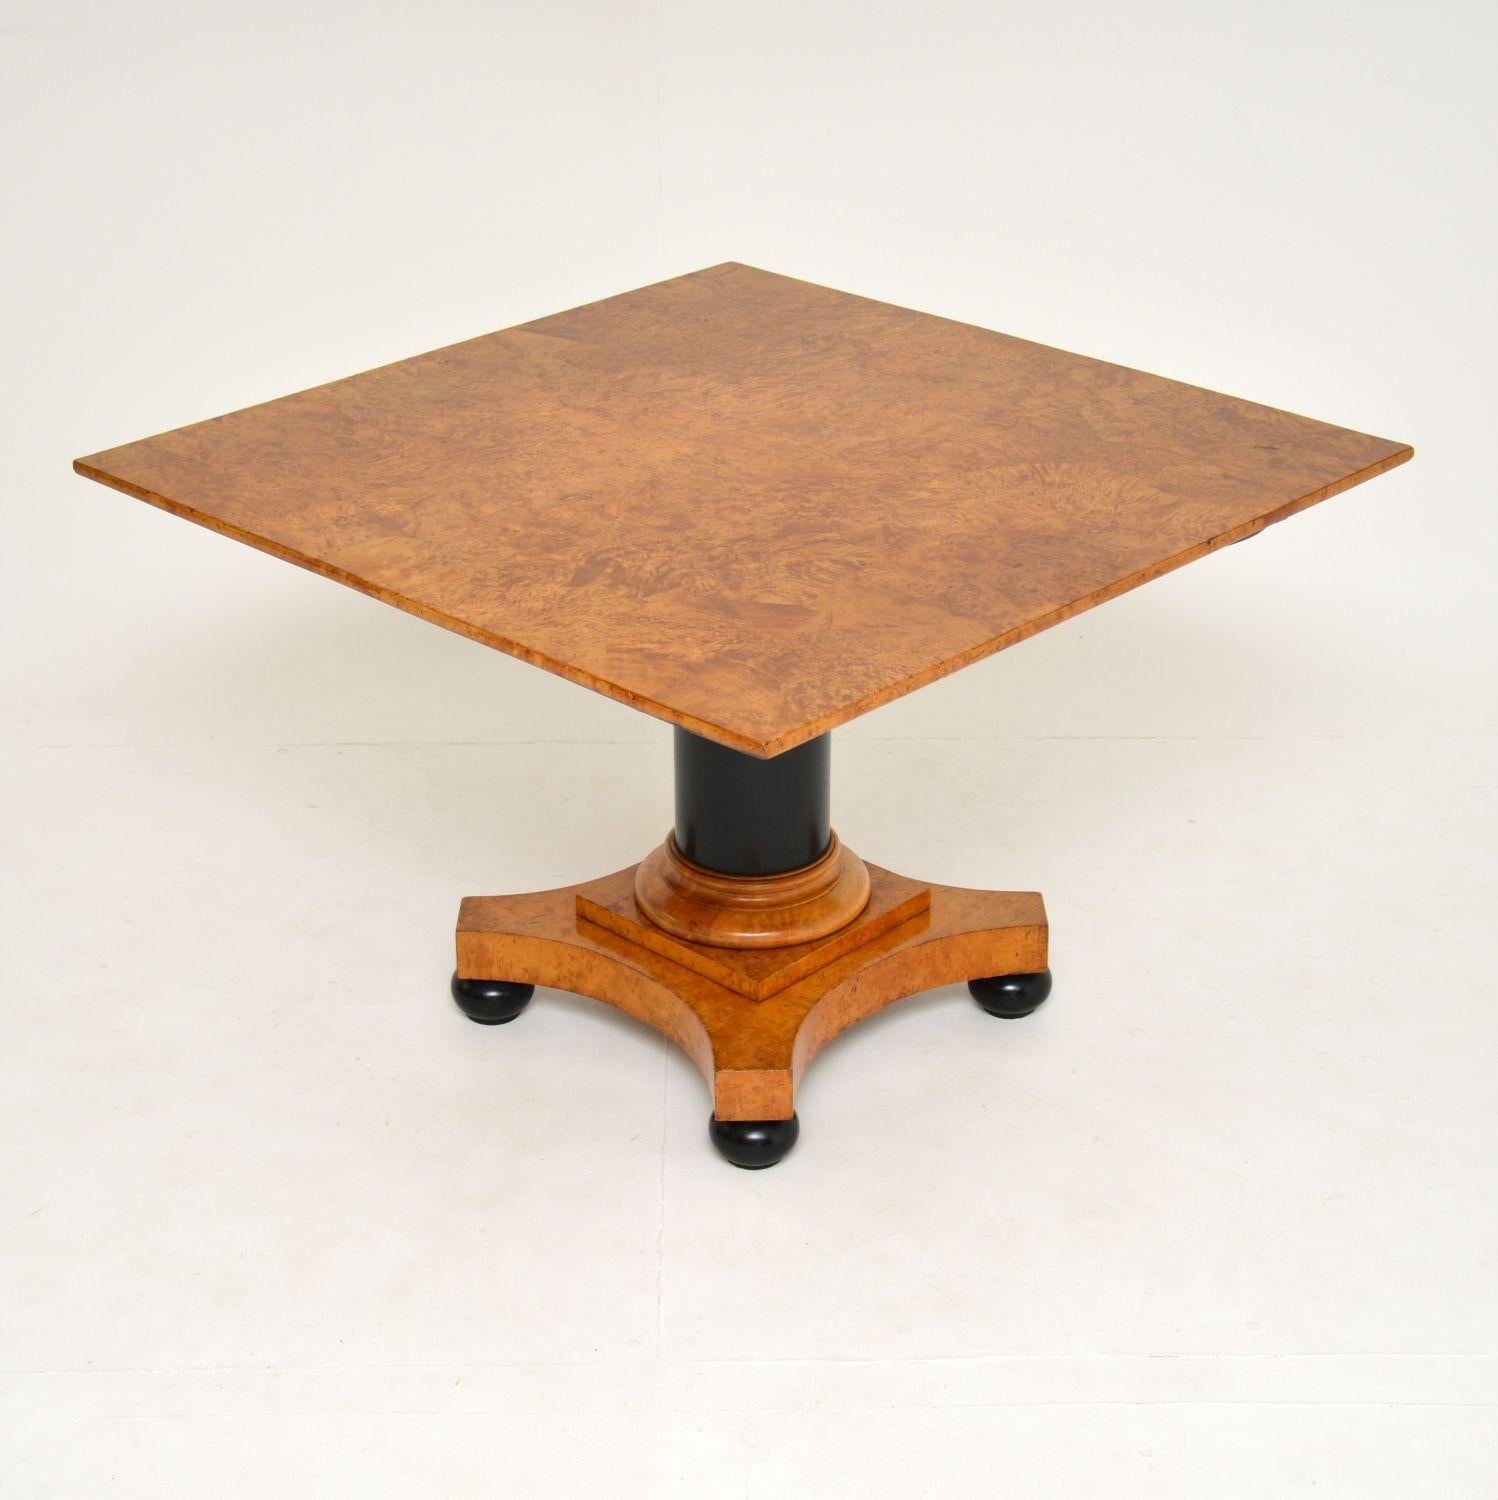 A stunning antique coffee / occasional table, this was made in Sweden and dates from around the 1840s period. It is beautifully made from burr birch and ebonised solid wood.

The square top is large and has the most exquisite color and grain